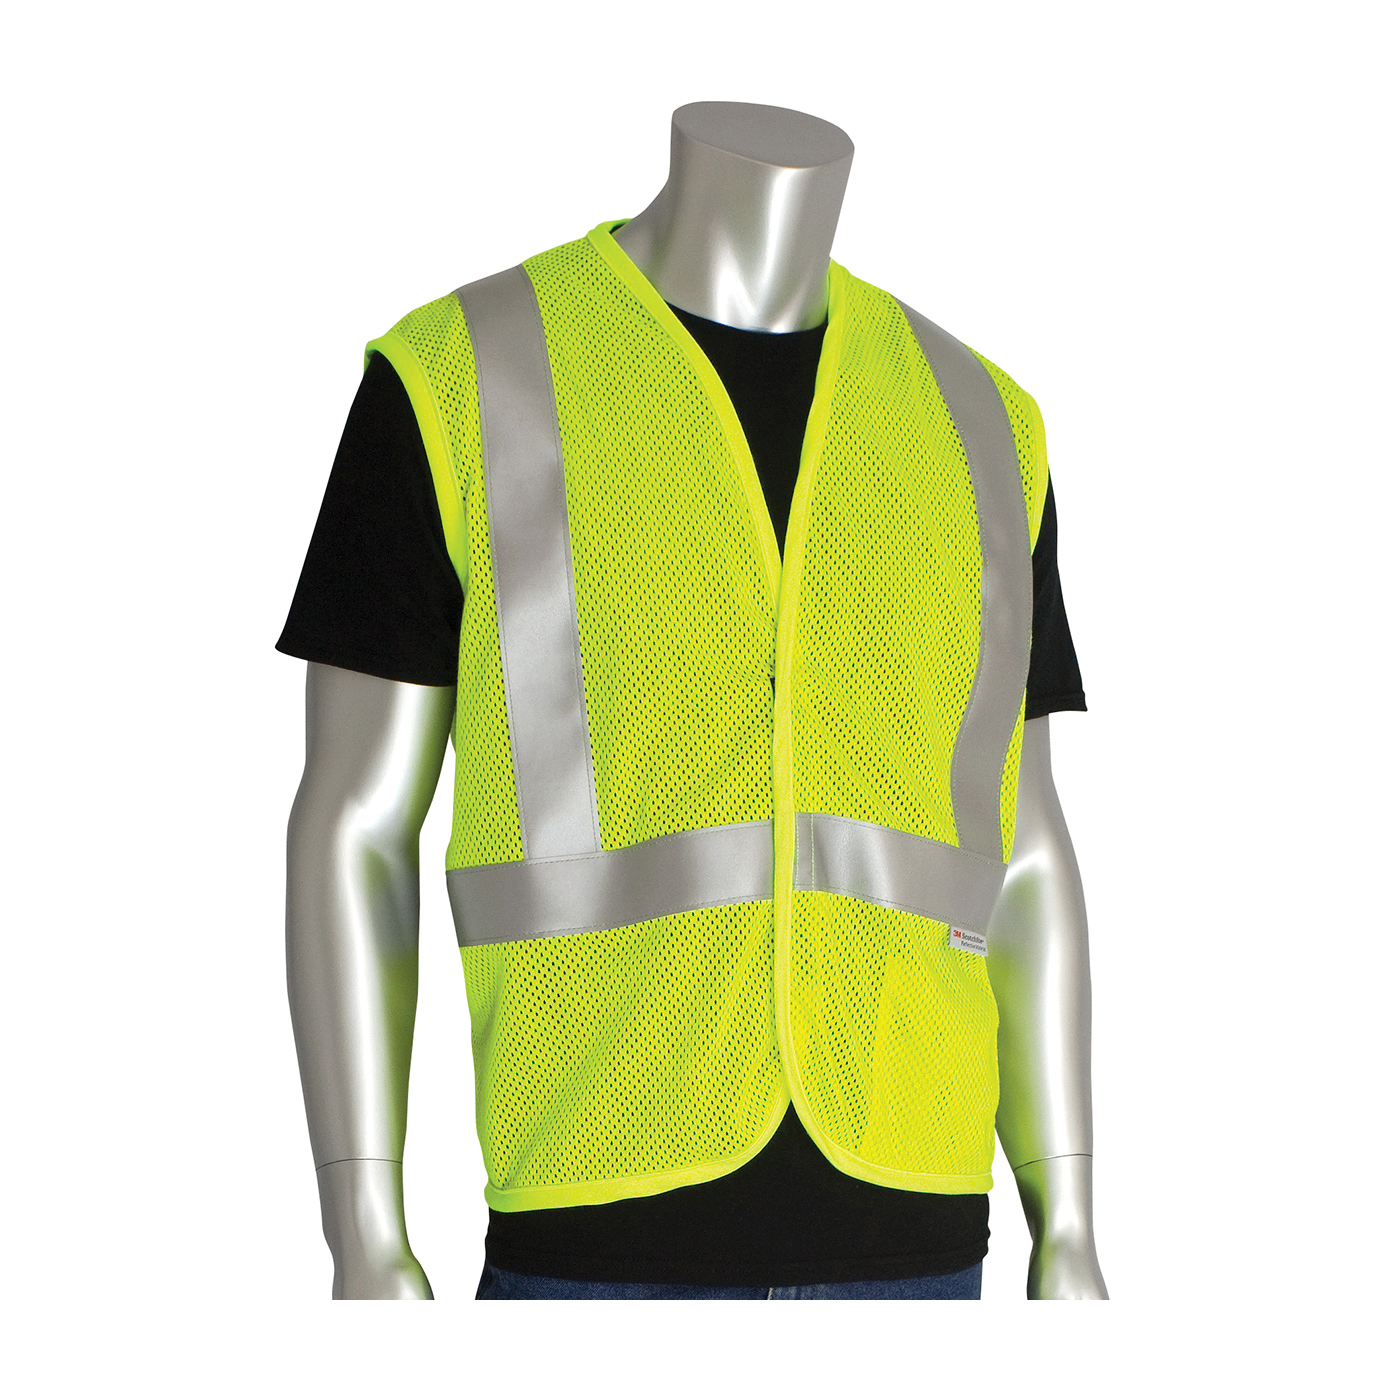 PIP® 305-2100-3X Arc and Flame Resistant Vest, 3XL, Hi-Viz Lime Yellow, Solid GlenGuard® Modacrylic/Aramid Blend Mesh Fabric, Hook and Loop Closure, 1 Pockets, ANSI Class: Class 2, Specifications Met: ANSI 107 Type R